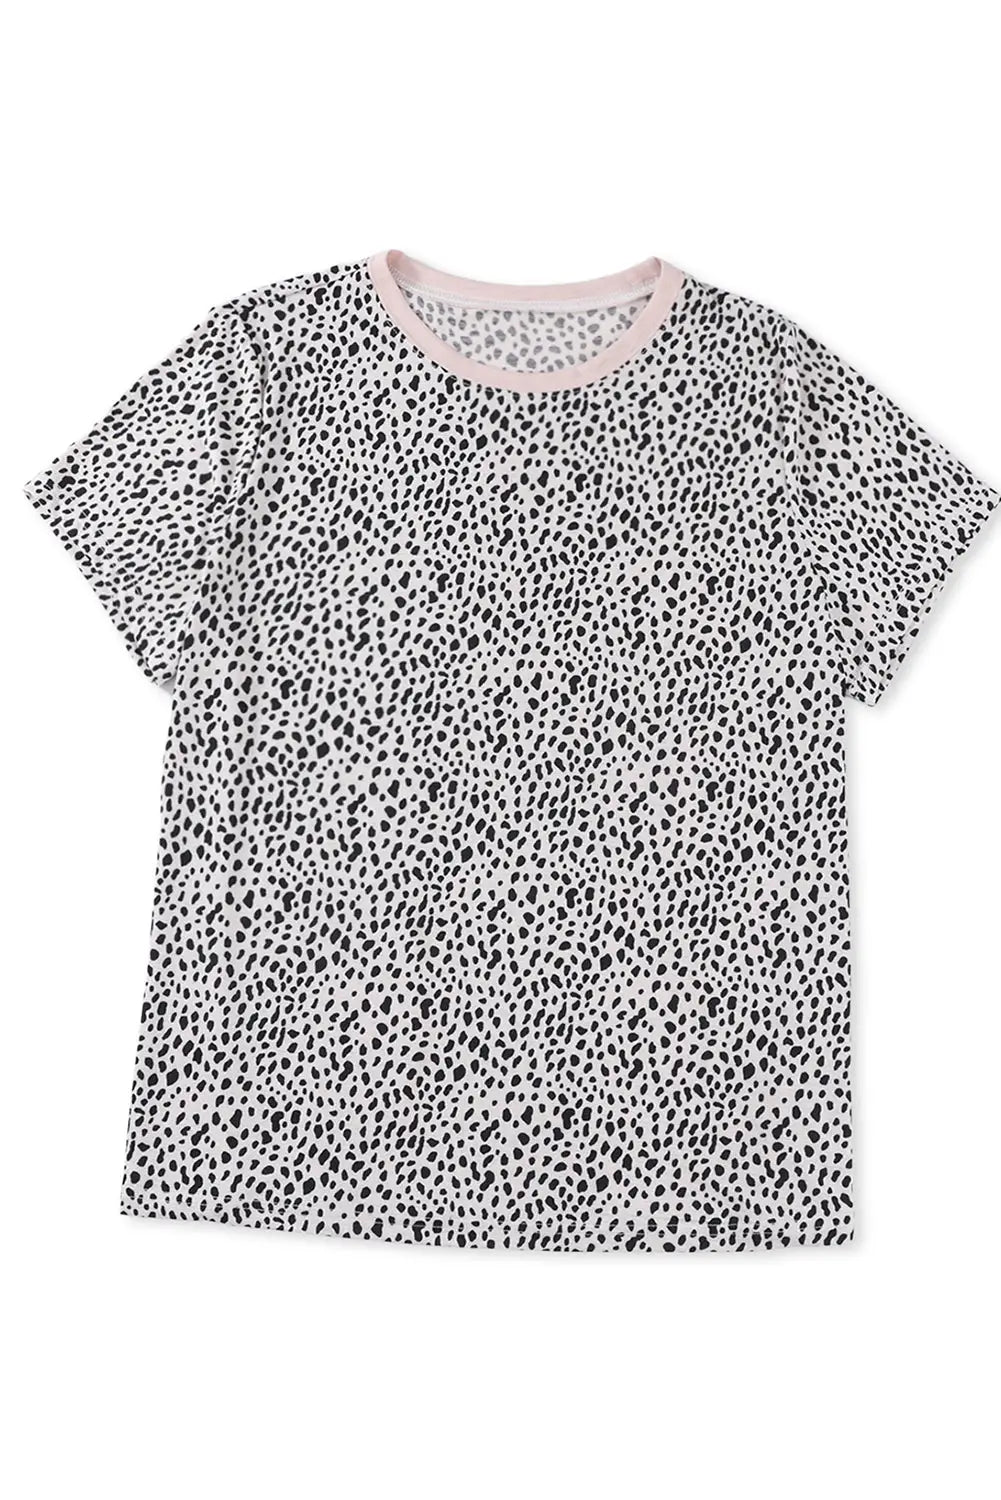 Animal spotted print round neck long sleeve top - tops